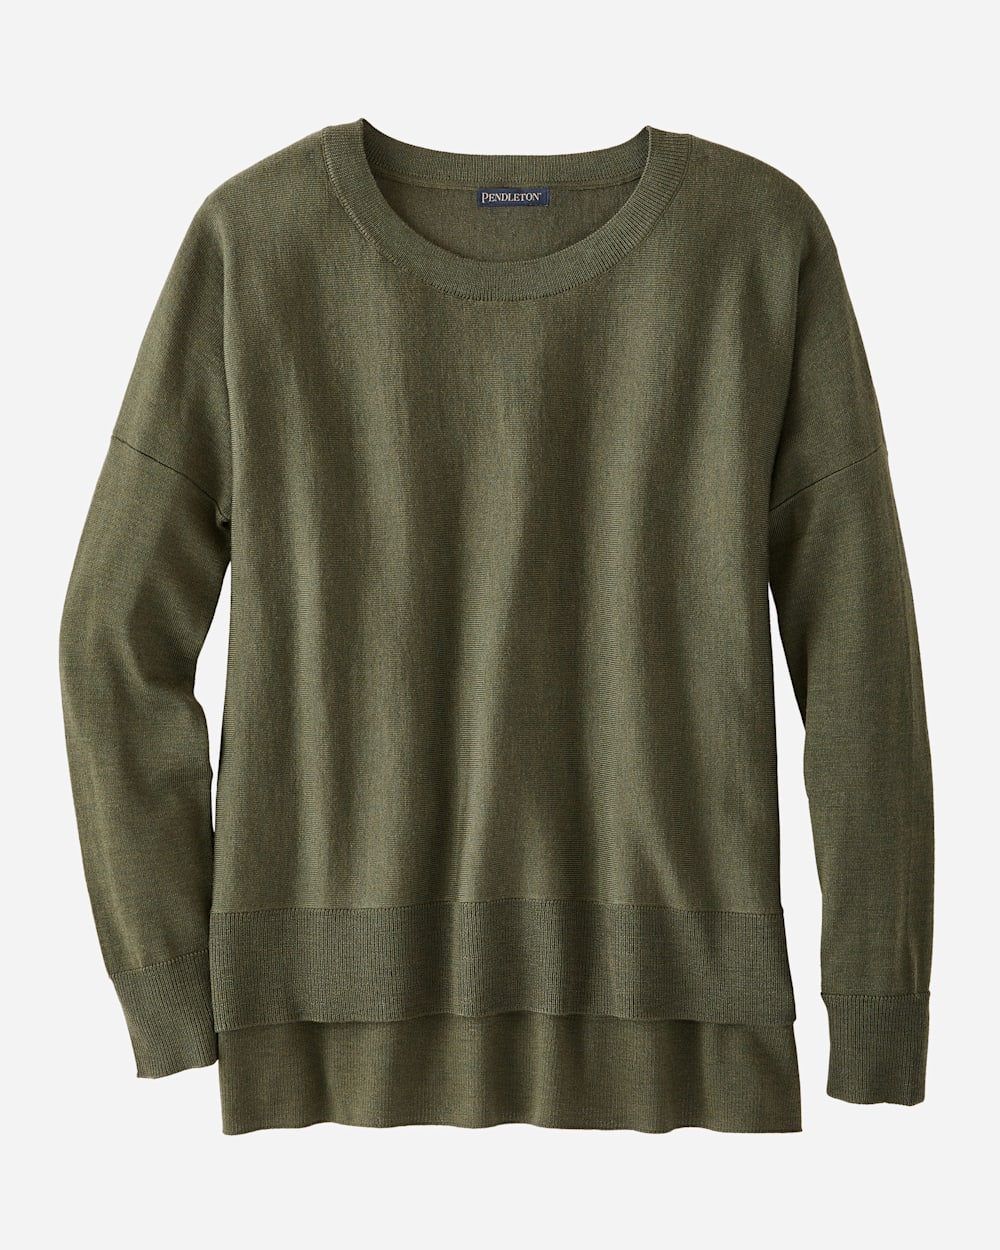 WOMEN'S MERINO EASY-FIT PULLOVER IN OLIVE image number 1